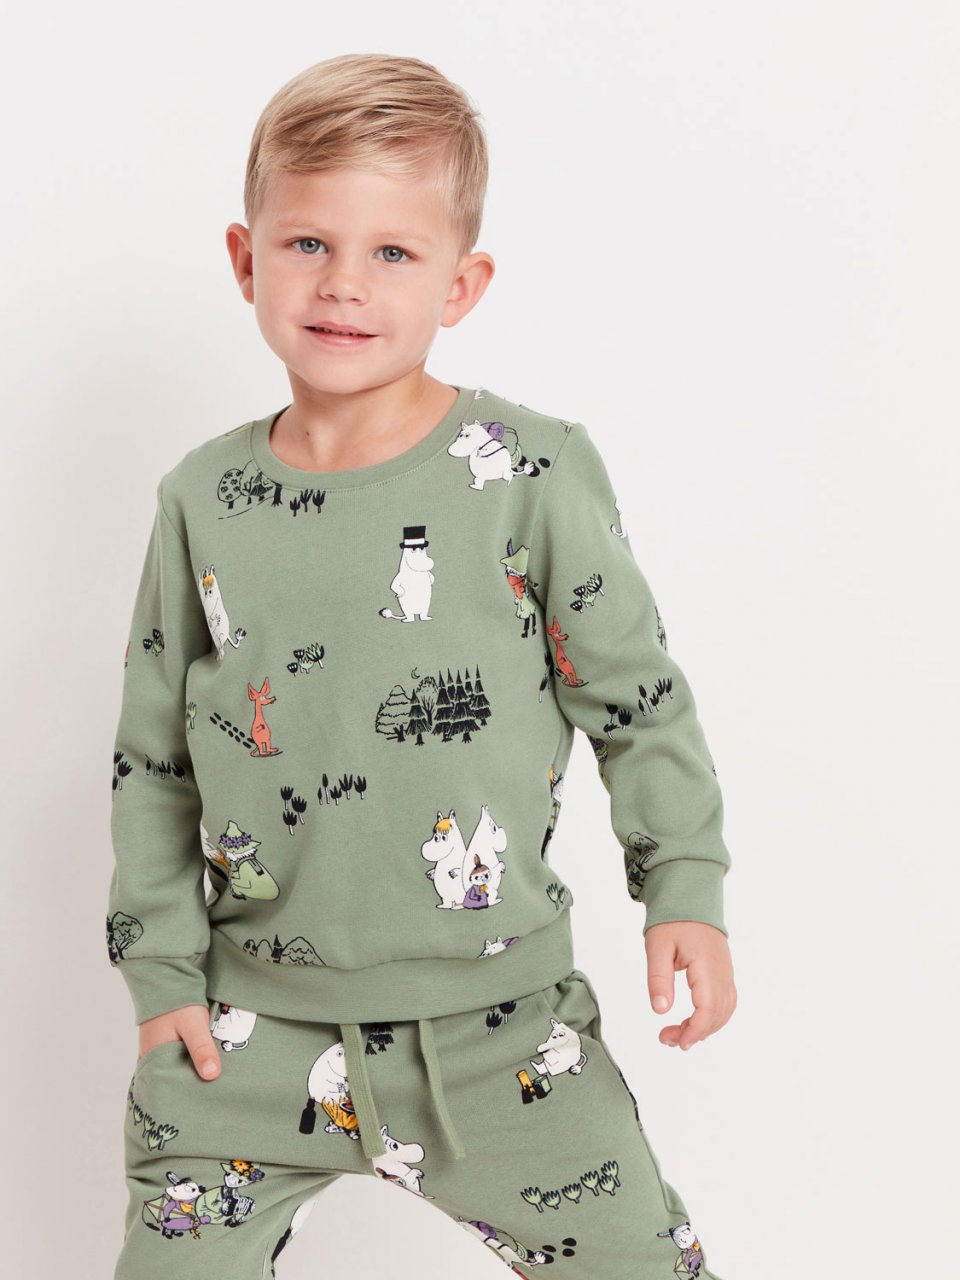 Now available online: Lindex releases a playful Moomin-themed